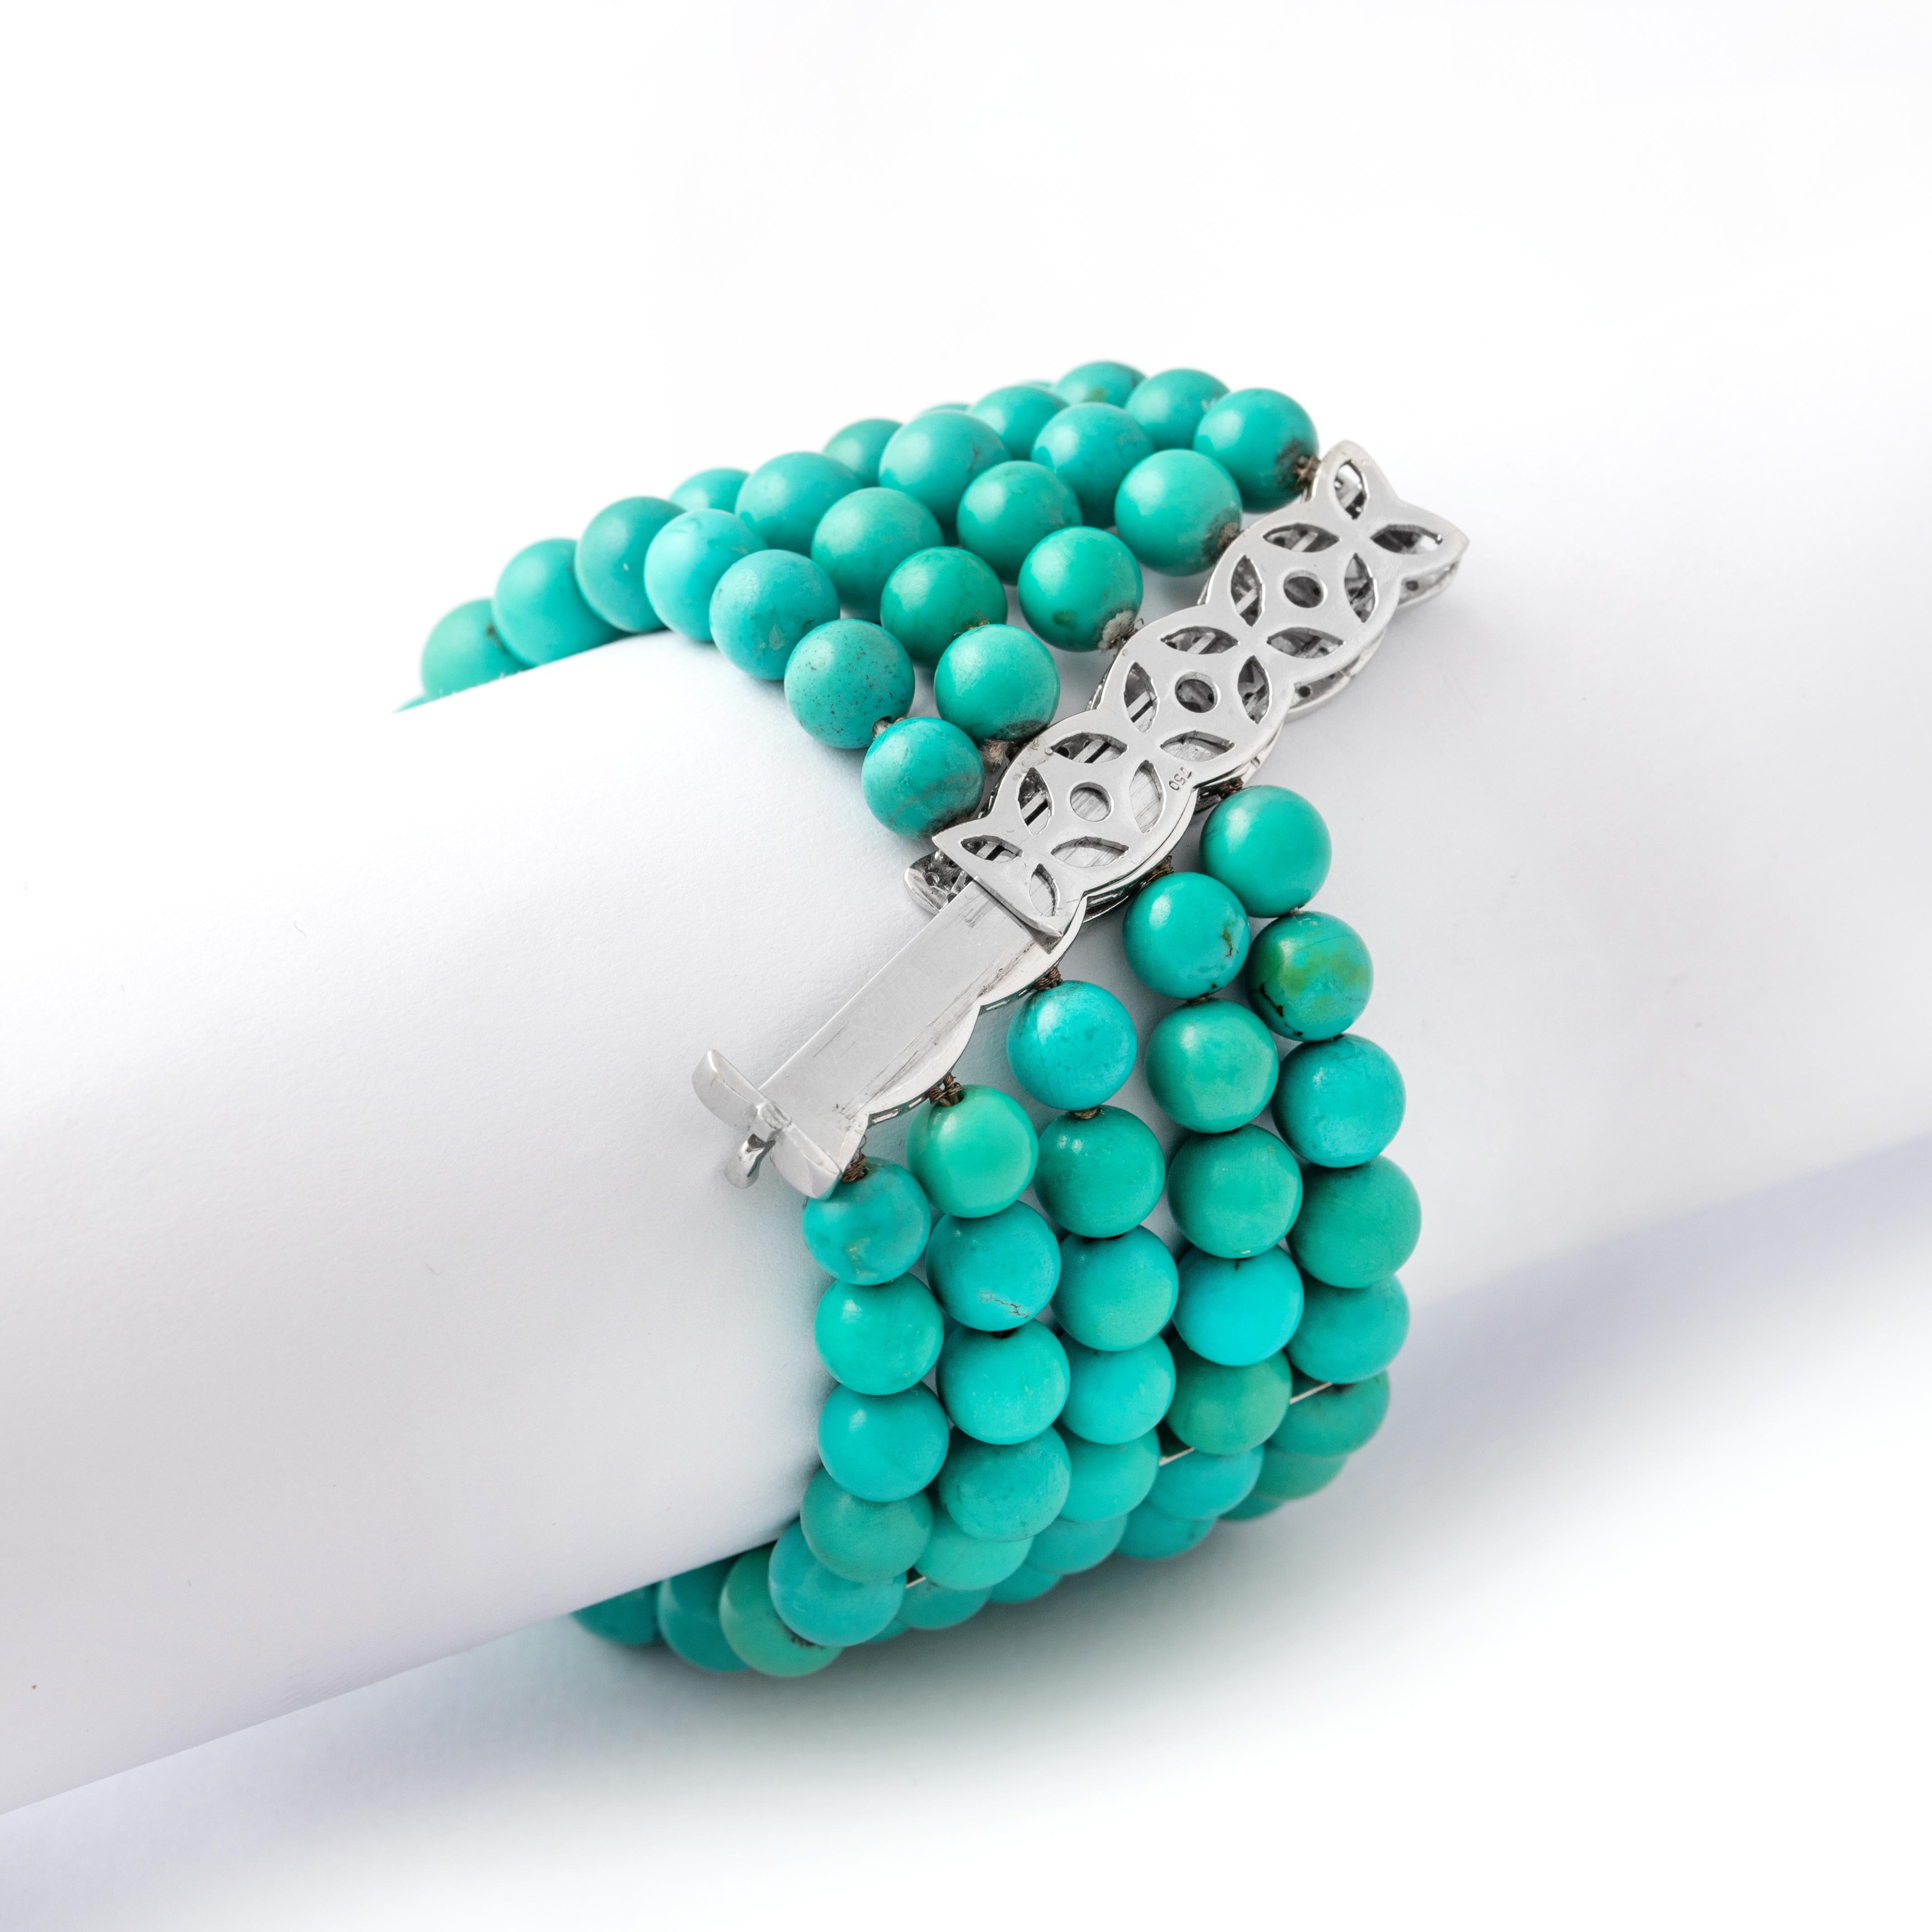 Natural Turquoise Bracelet.
Elevate your style with our Natural Turquoise Bracelet. Crafted with genuine turquoise stones, it exudes calming energy and timeless elegance. Whether worn solo or stacked, this versatile piece adds a touch of